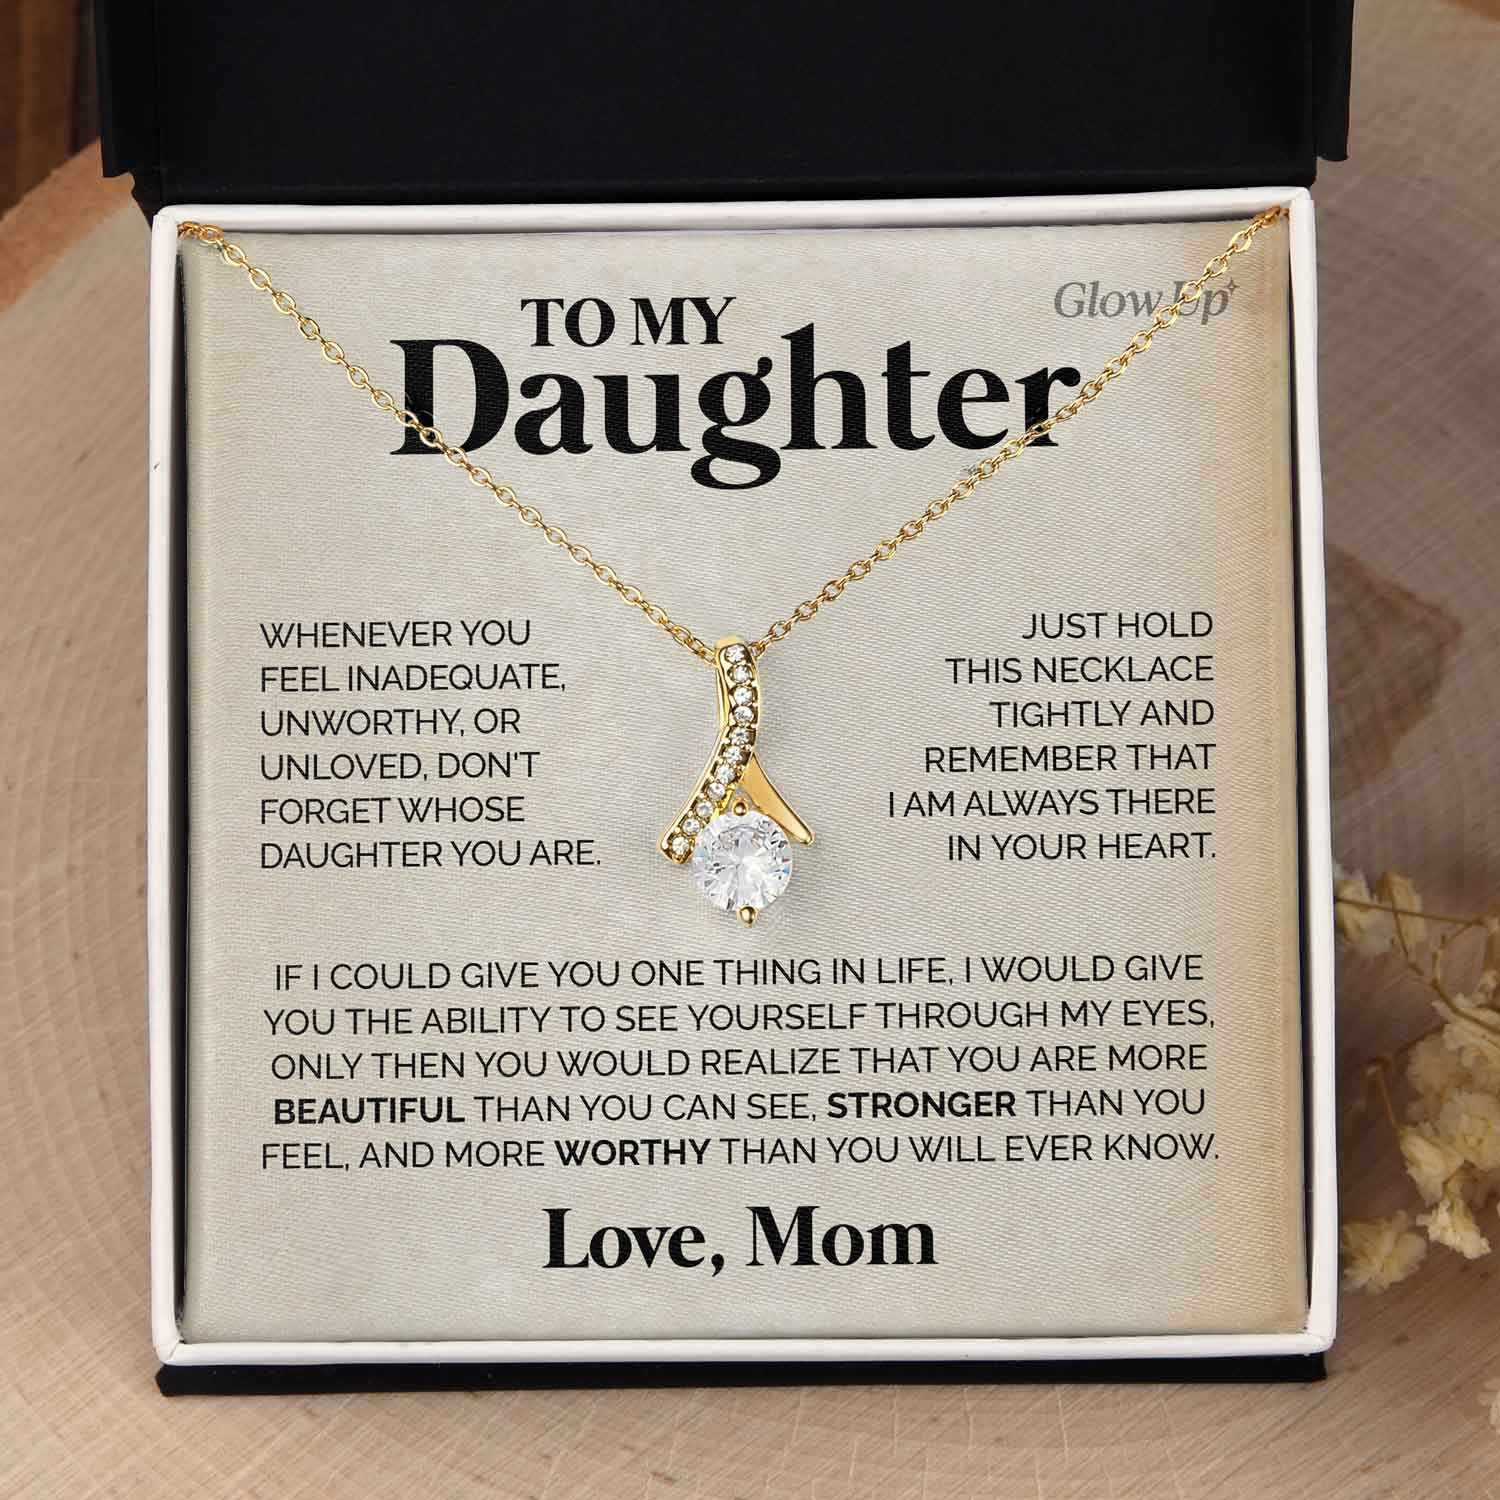 ShineOn Fulfillment Jewelry 18K Yellow Gold Finish / Two-Toned Box To My Daughter - You are in my heart - Ribbon Necklace